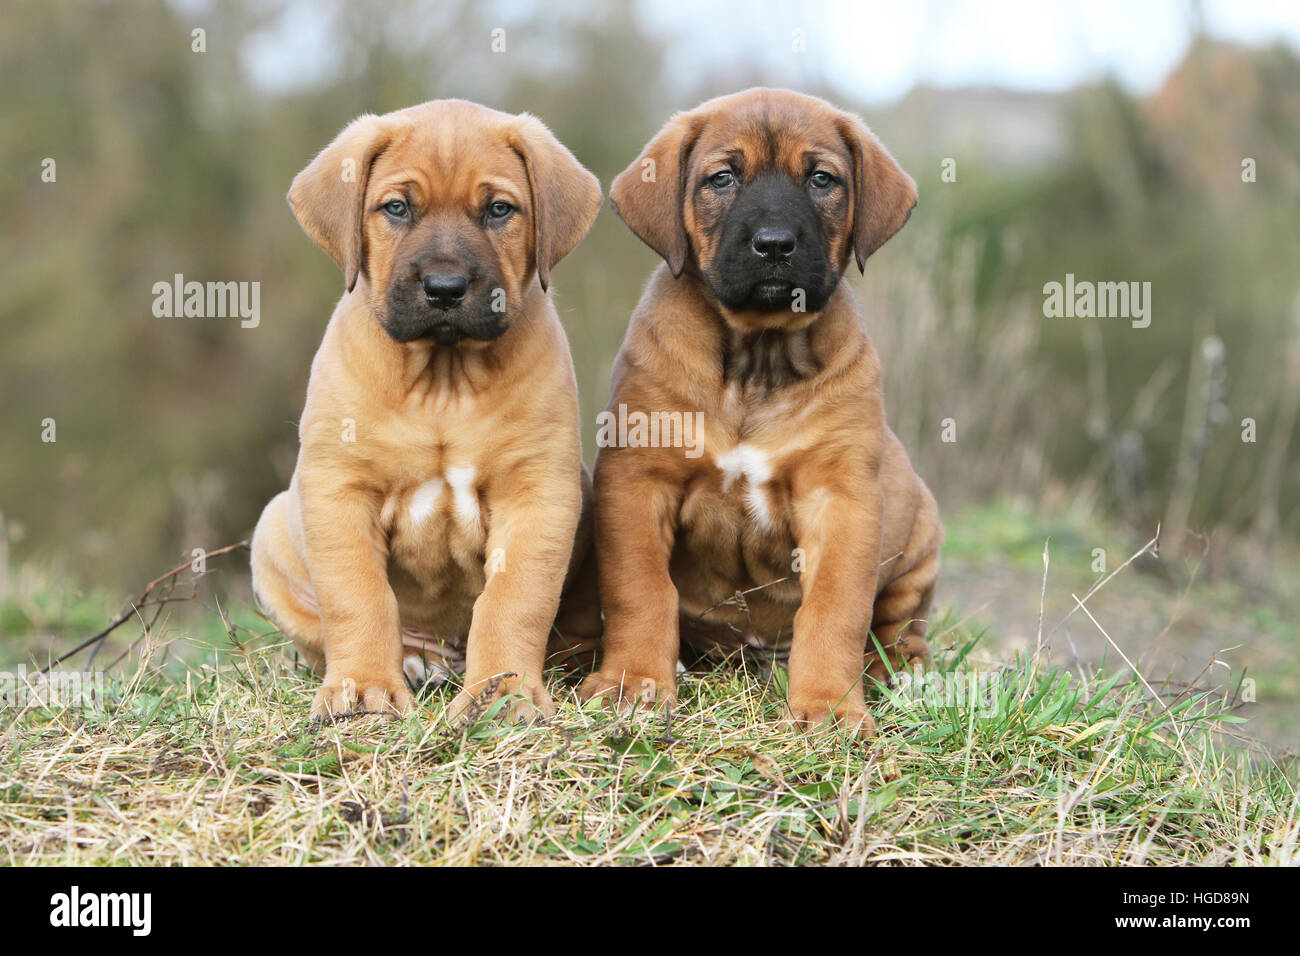 Dog Tosa Inu Japanese Mastiff Two Puppies Sitting In A Meadow Stock Photo Alamy